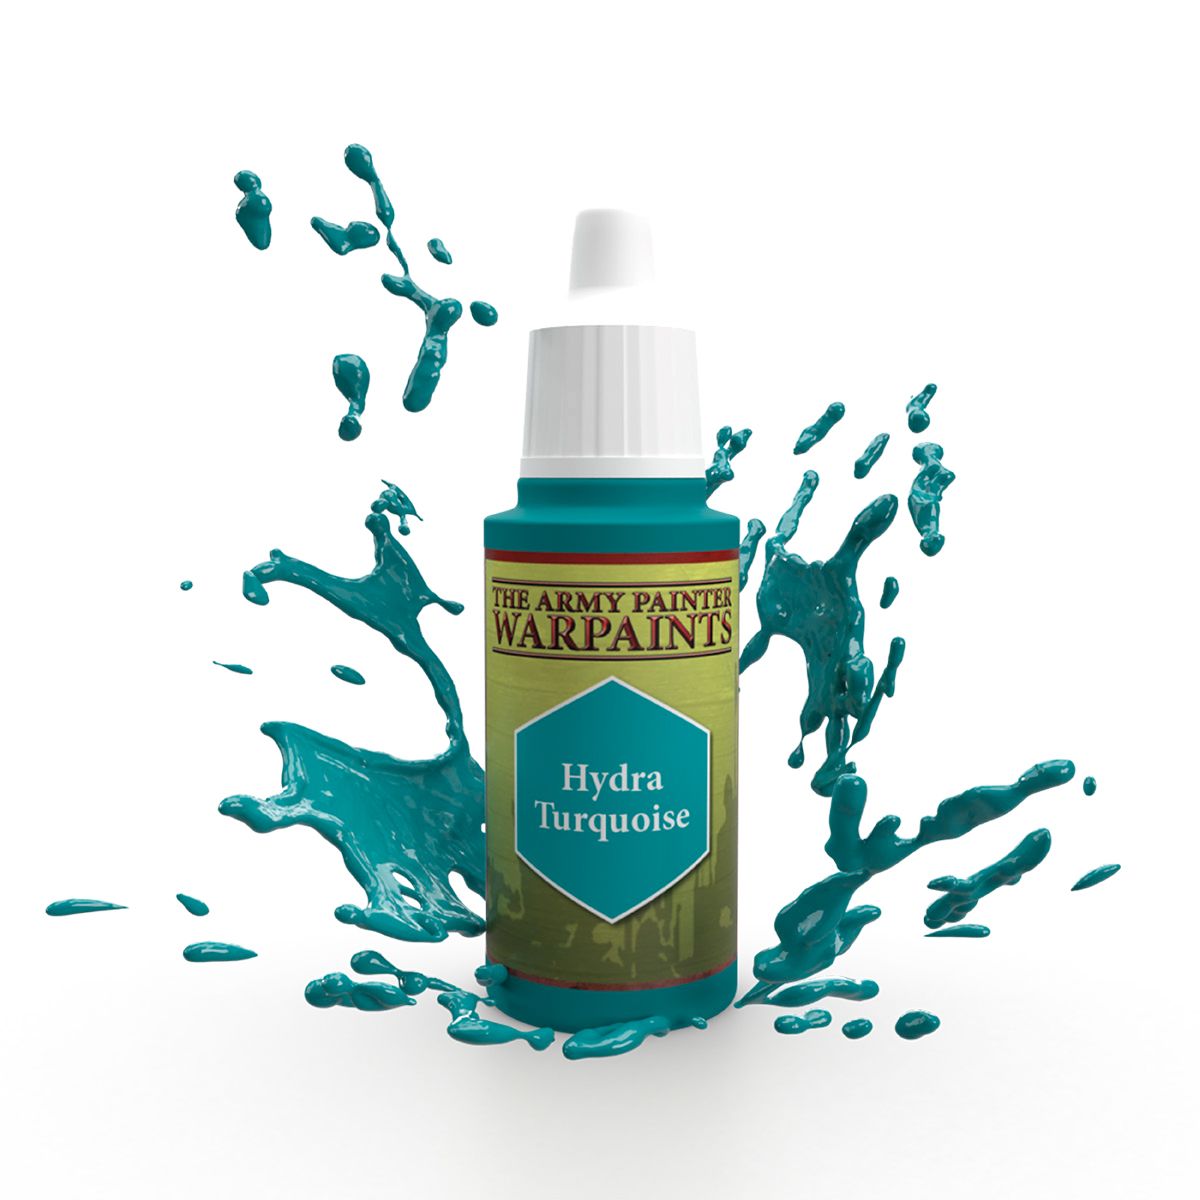 ARMY PAINTER WARPAINTS: HYDRA TURQUOISE | Gopher Games